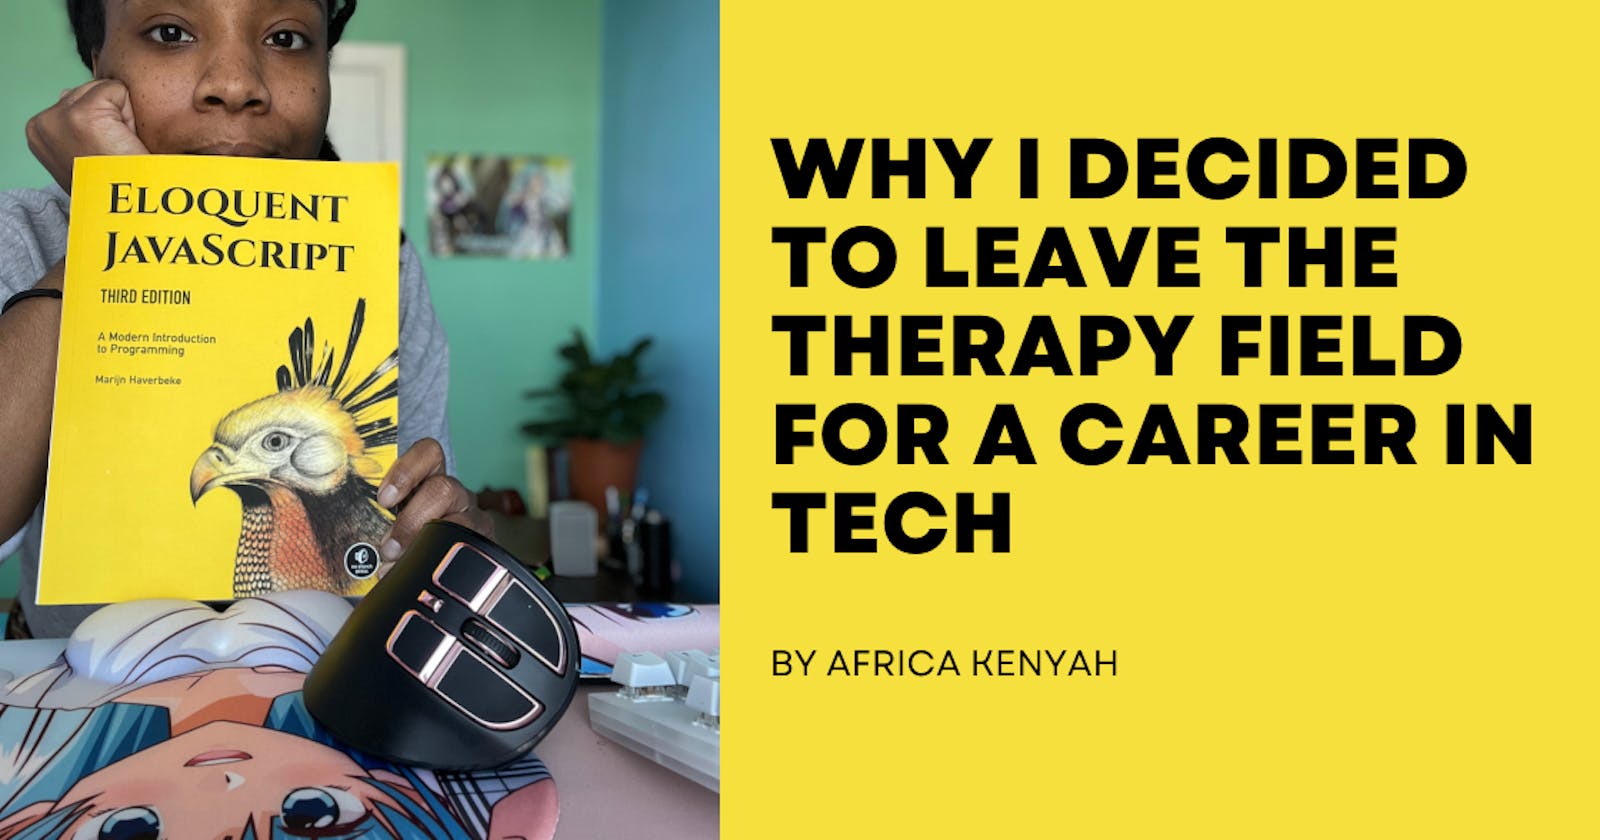 Why I Decided to Leave the Therapy Field for a Career in Tech